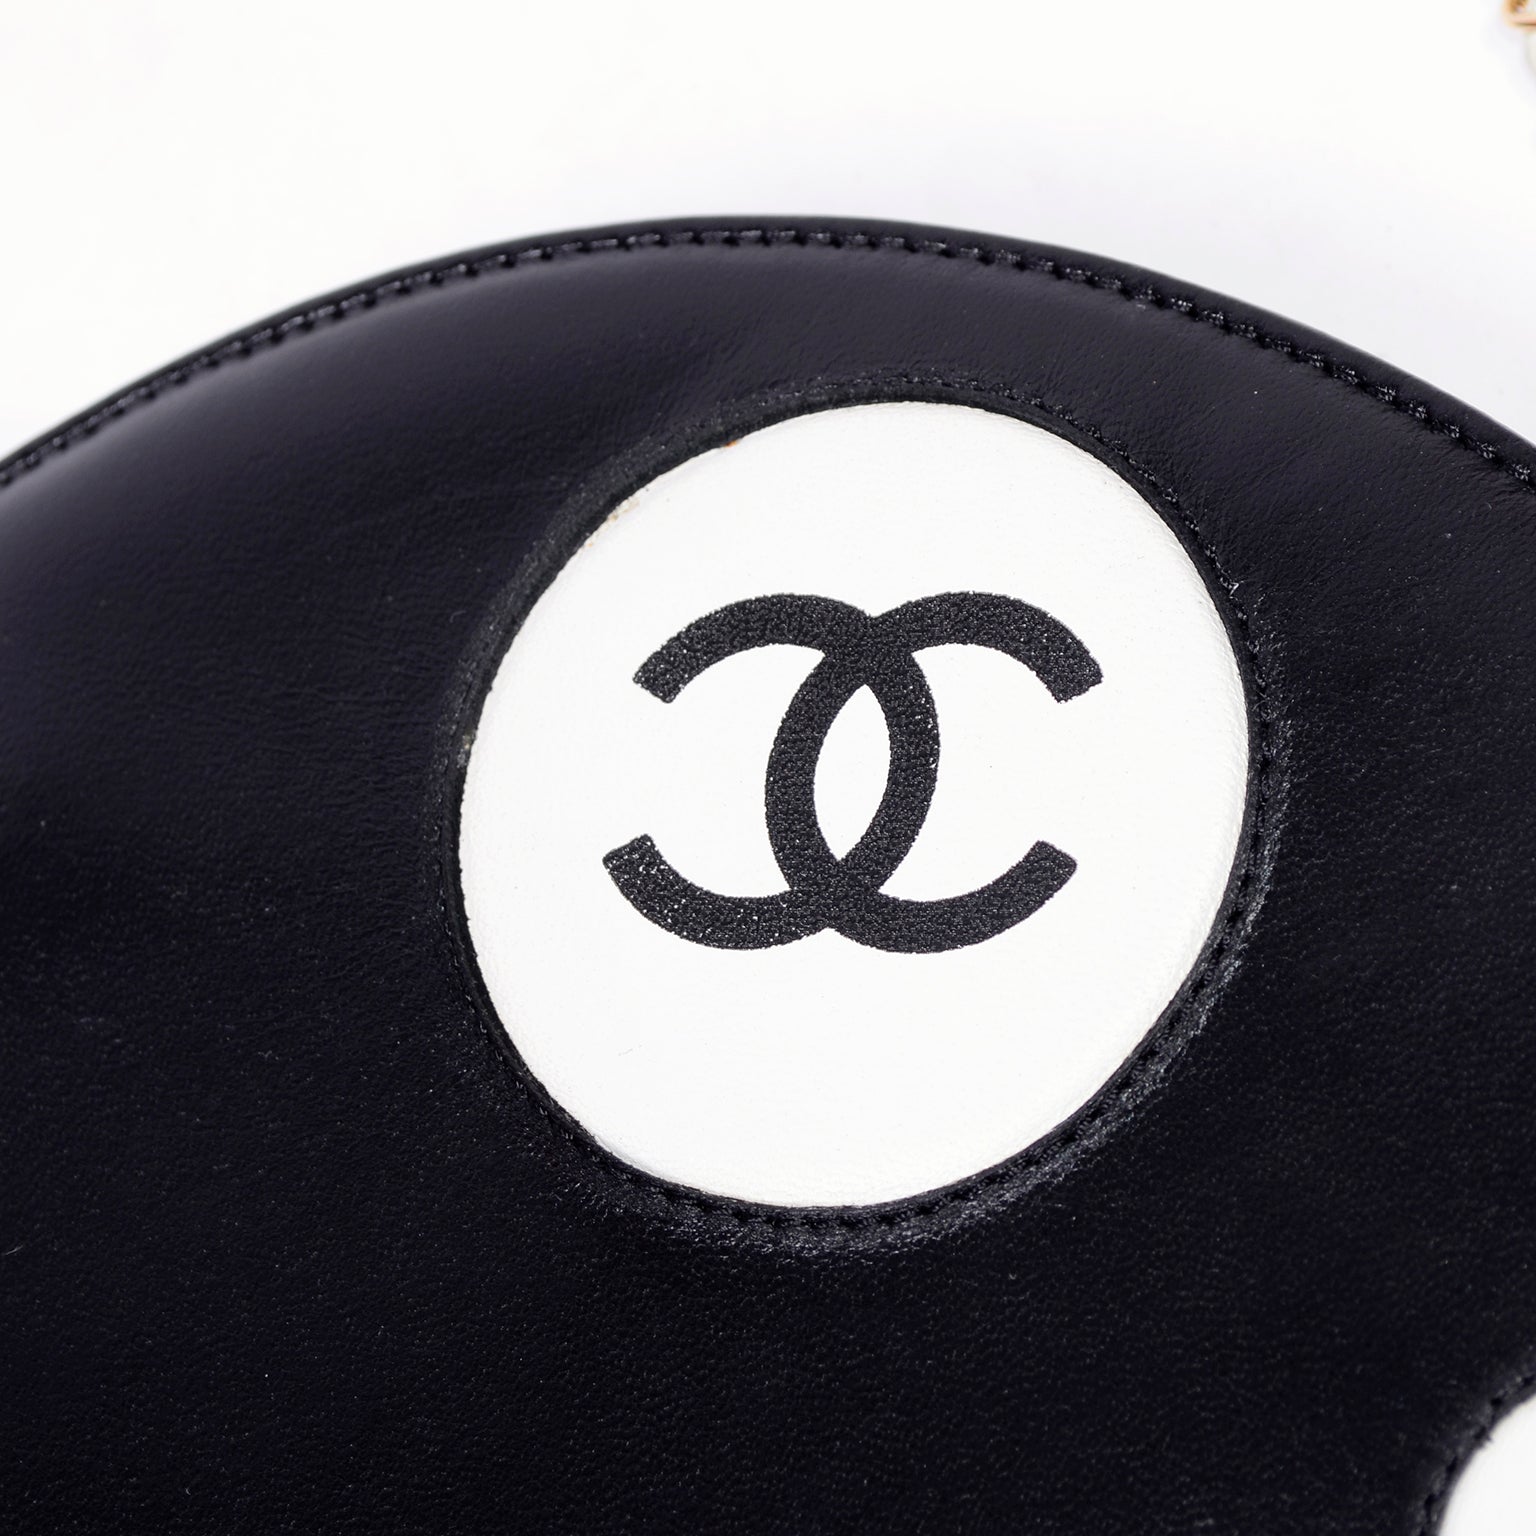 Don't Miss Out on Rare Vintage Chanel at the Sotheby's Sale this